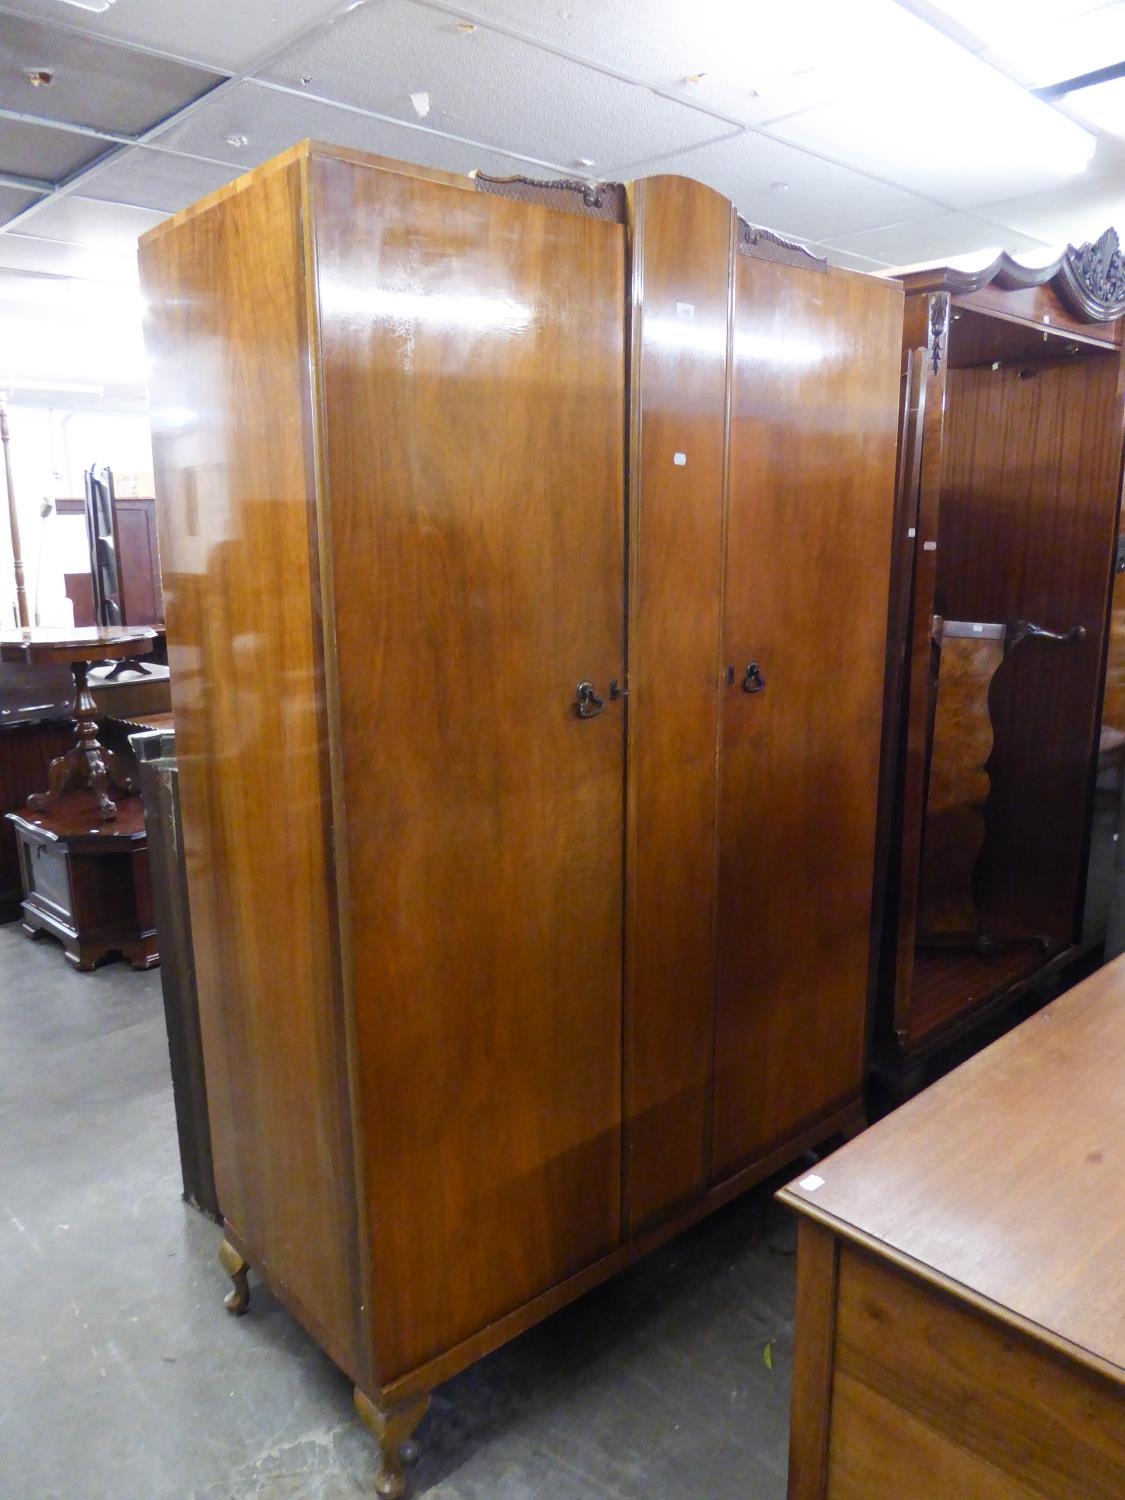 A QUEEN ANNE STYLE DOUBLE DOOR WARDROBE, RAISED ON SMALL CABRIOLE FEET